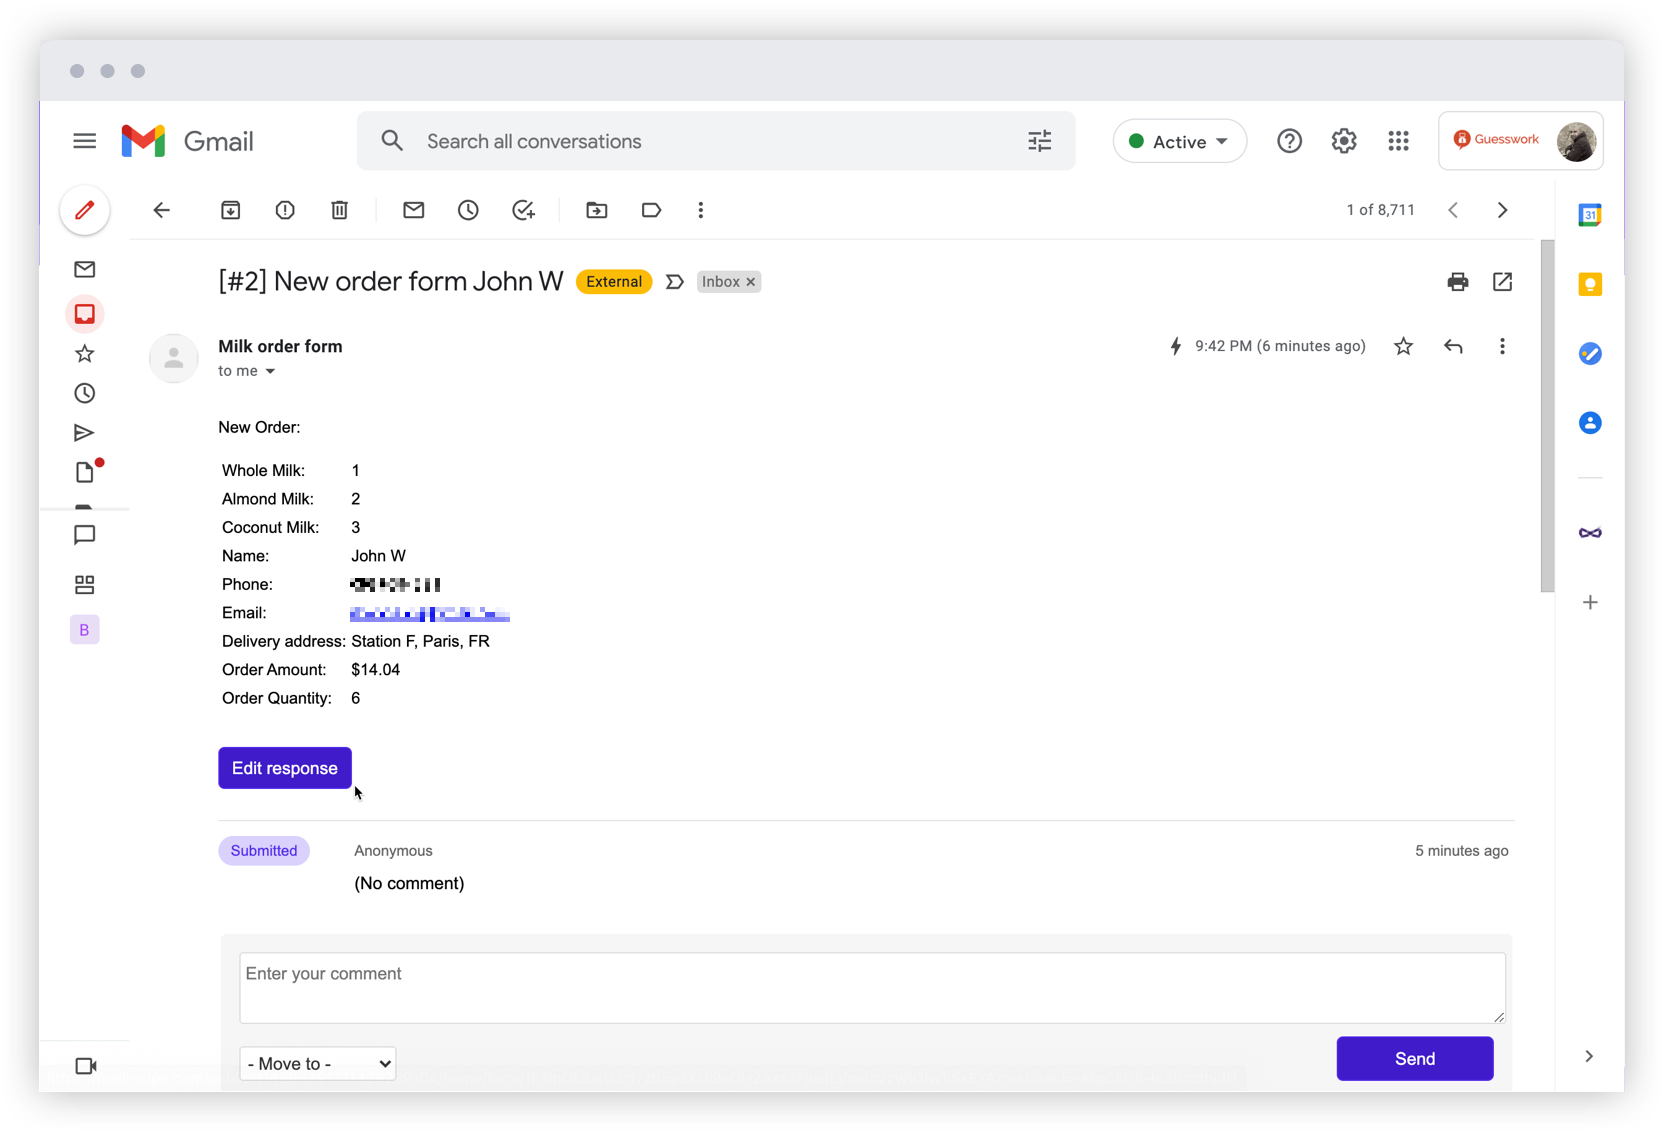 Easily access the form response inside gmail and update the responses using the edit response button